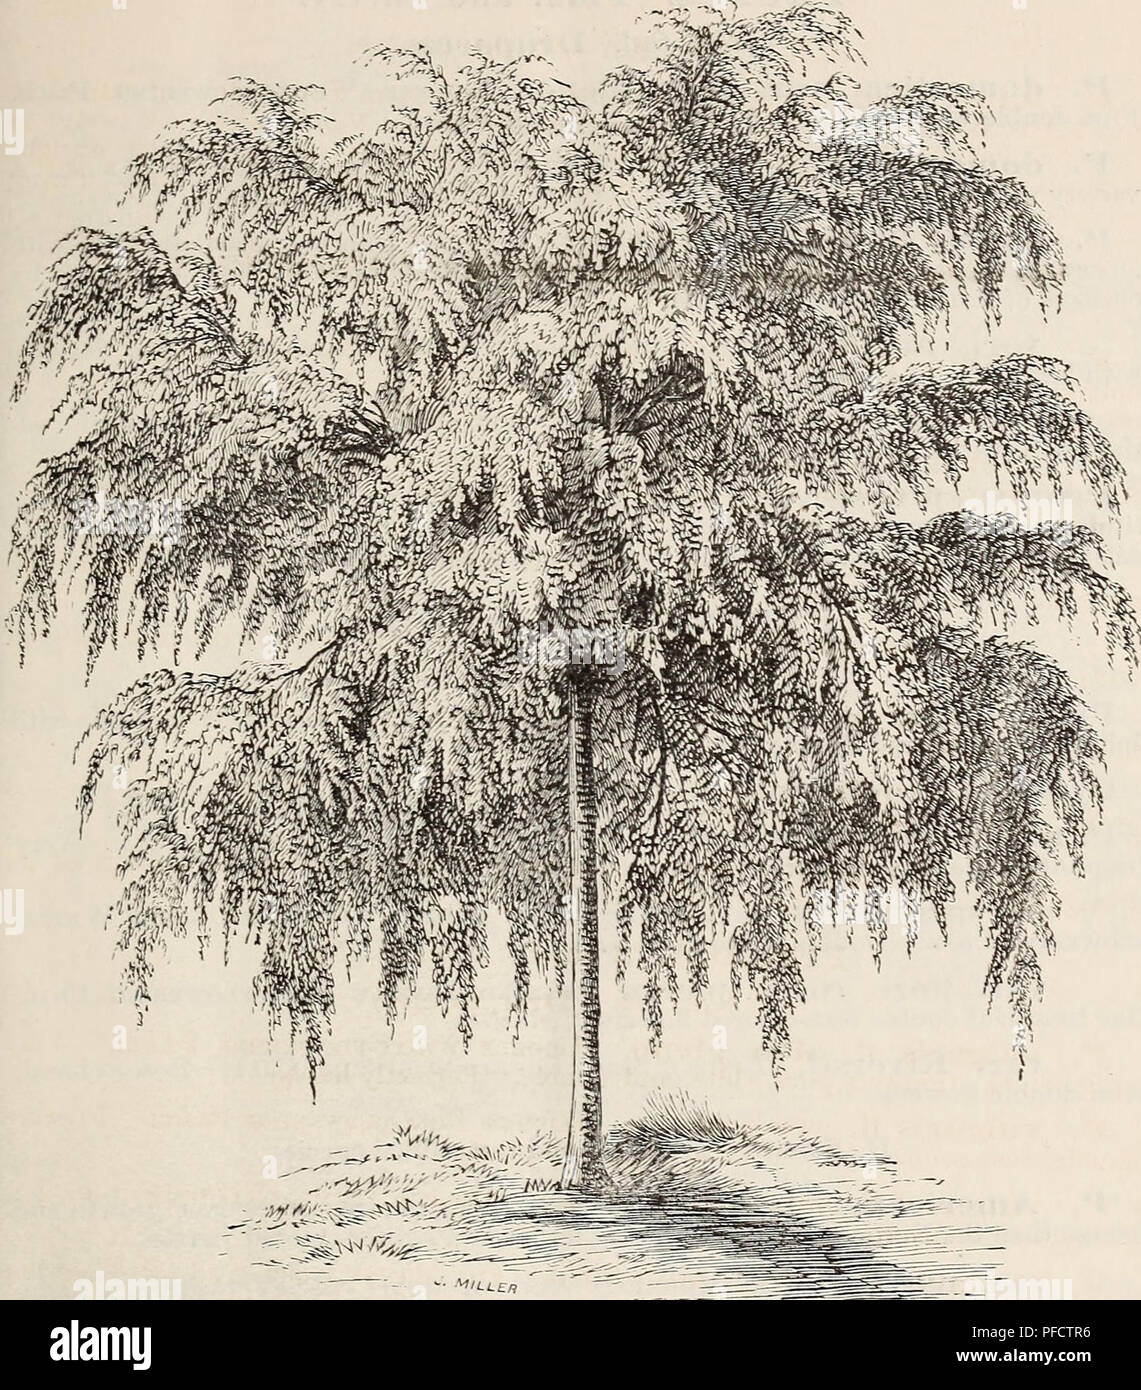 . Descriptive catalogue of ornamental trees, shrubs, roses, flowering plants, &amp;c. Ornamental trees Catalogs; Shrubs Catalogs; Roses Catalogs; Flowers Catalogs. OB^AMEJSfTAL TREES, SHRUBS, ETC. 27. '^ll.LE/, WEEPING POPLAR. *I*. balsaillifera. Balsam Poplar o:s Tacamahac. A native species of re- markably rapid, luxuriant growth, M'ith large glossy foliage. P. crispa. Lindlet's Cei^p or Cueled-leaved Poplar. A singular variety, the bark on the young wood being raised in furrows. P. eleg'ailS. Of upright growth, bro-^Tiish wood and fine foliage. *P. fastig'iata or dilatata. Lombaedy Poplae. A Stock Photo